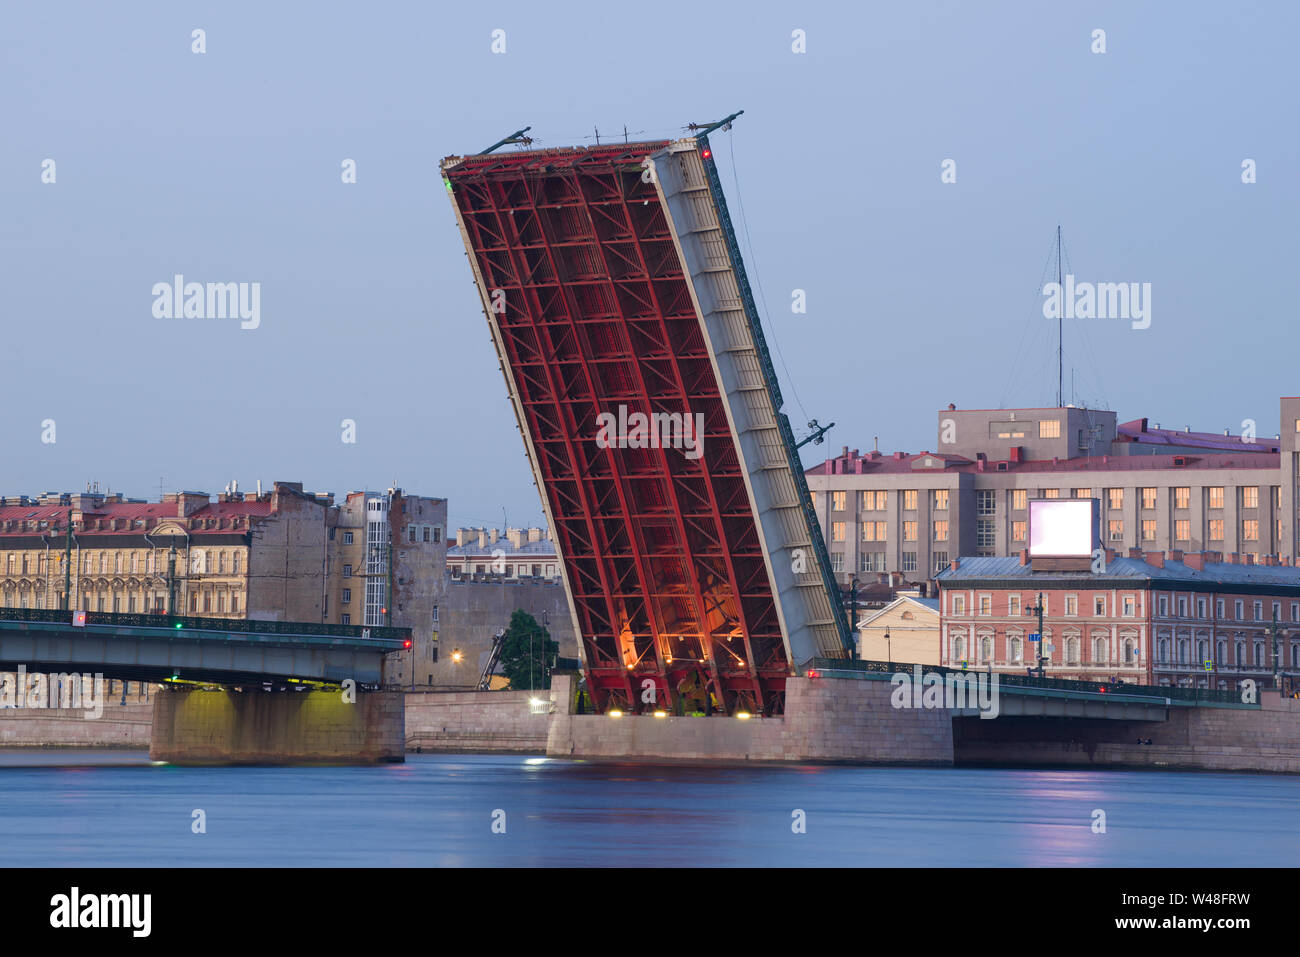 Divorced span of the Liteyny Bridge close up. White nights in St. Petersburg. Russia Stock Photo